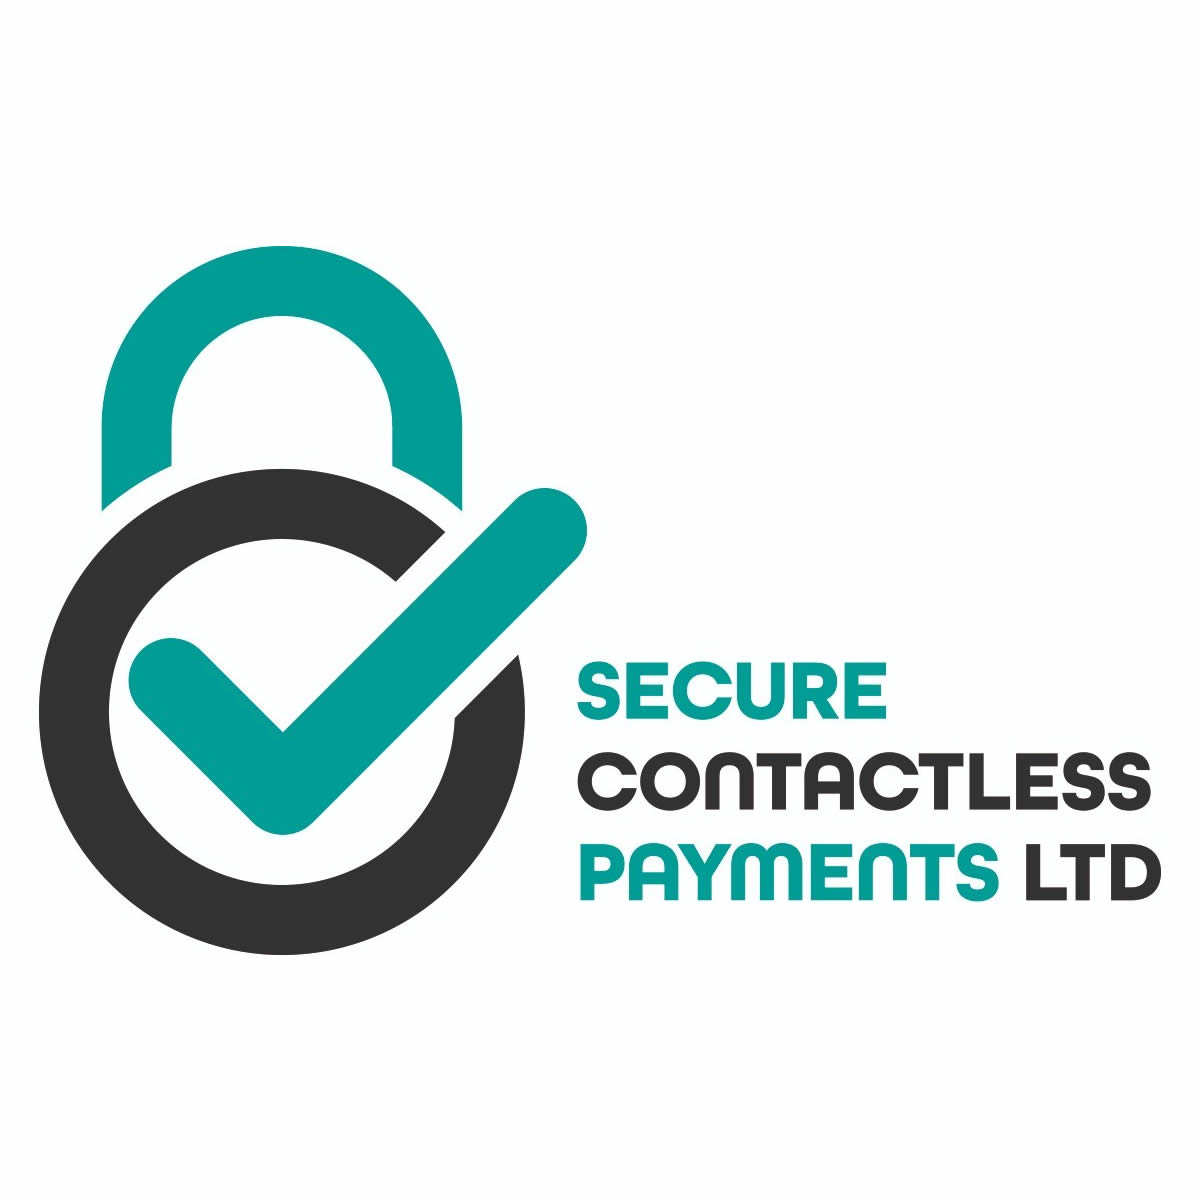 Secure Contactless Payments Ltd